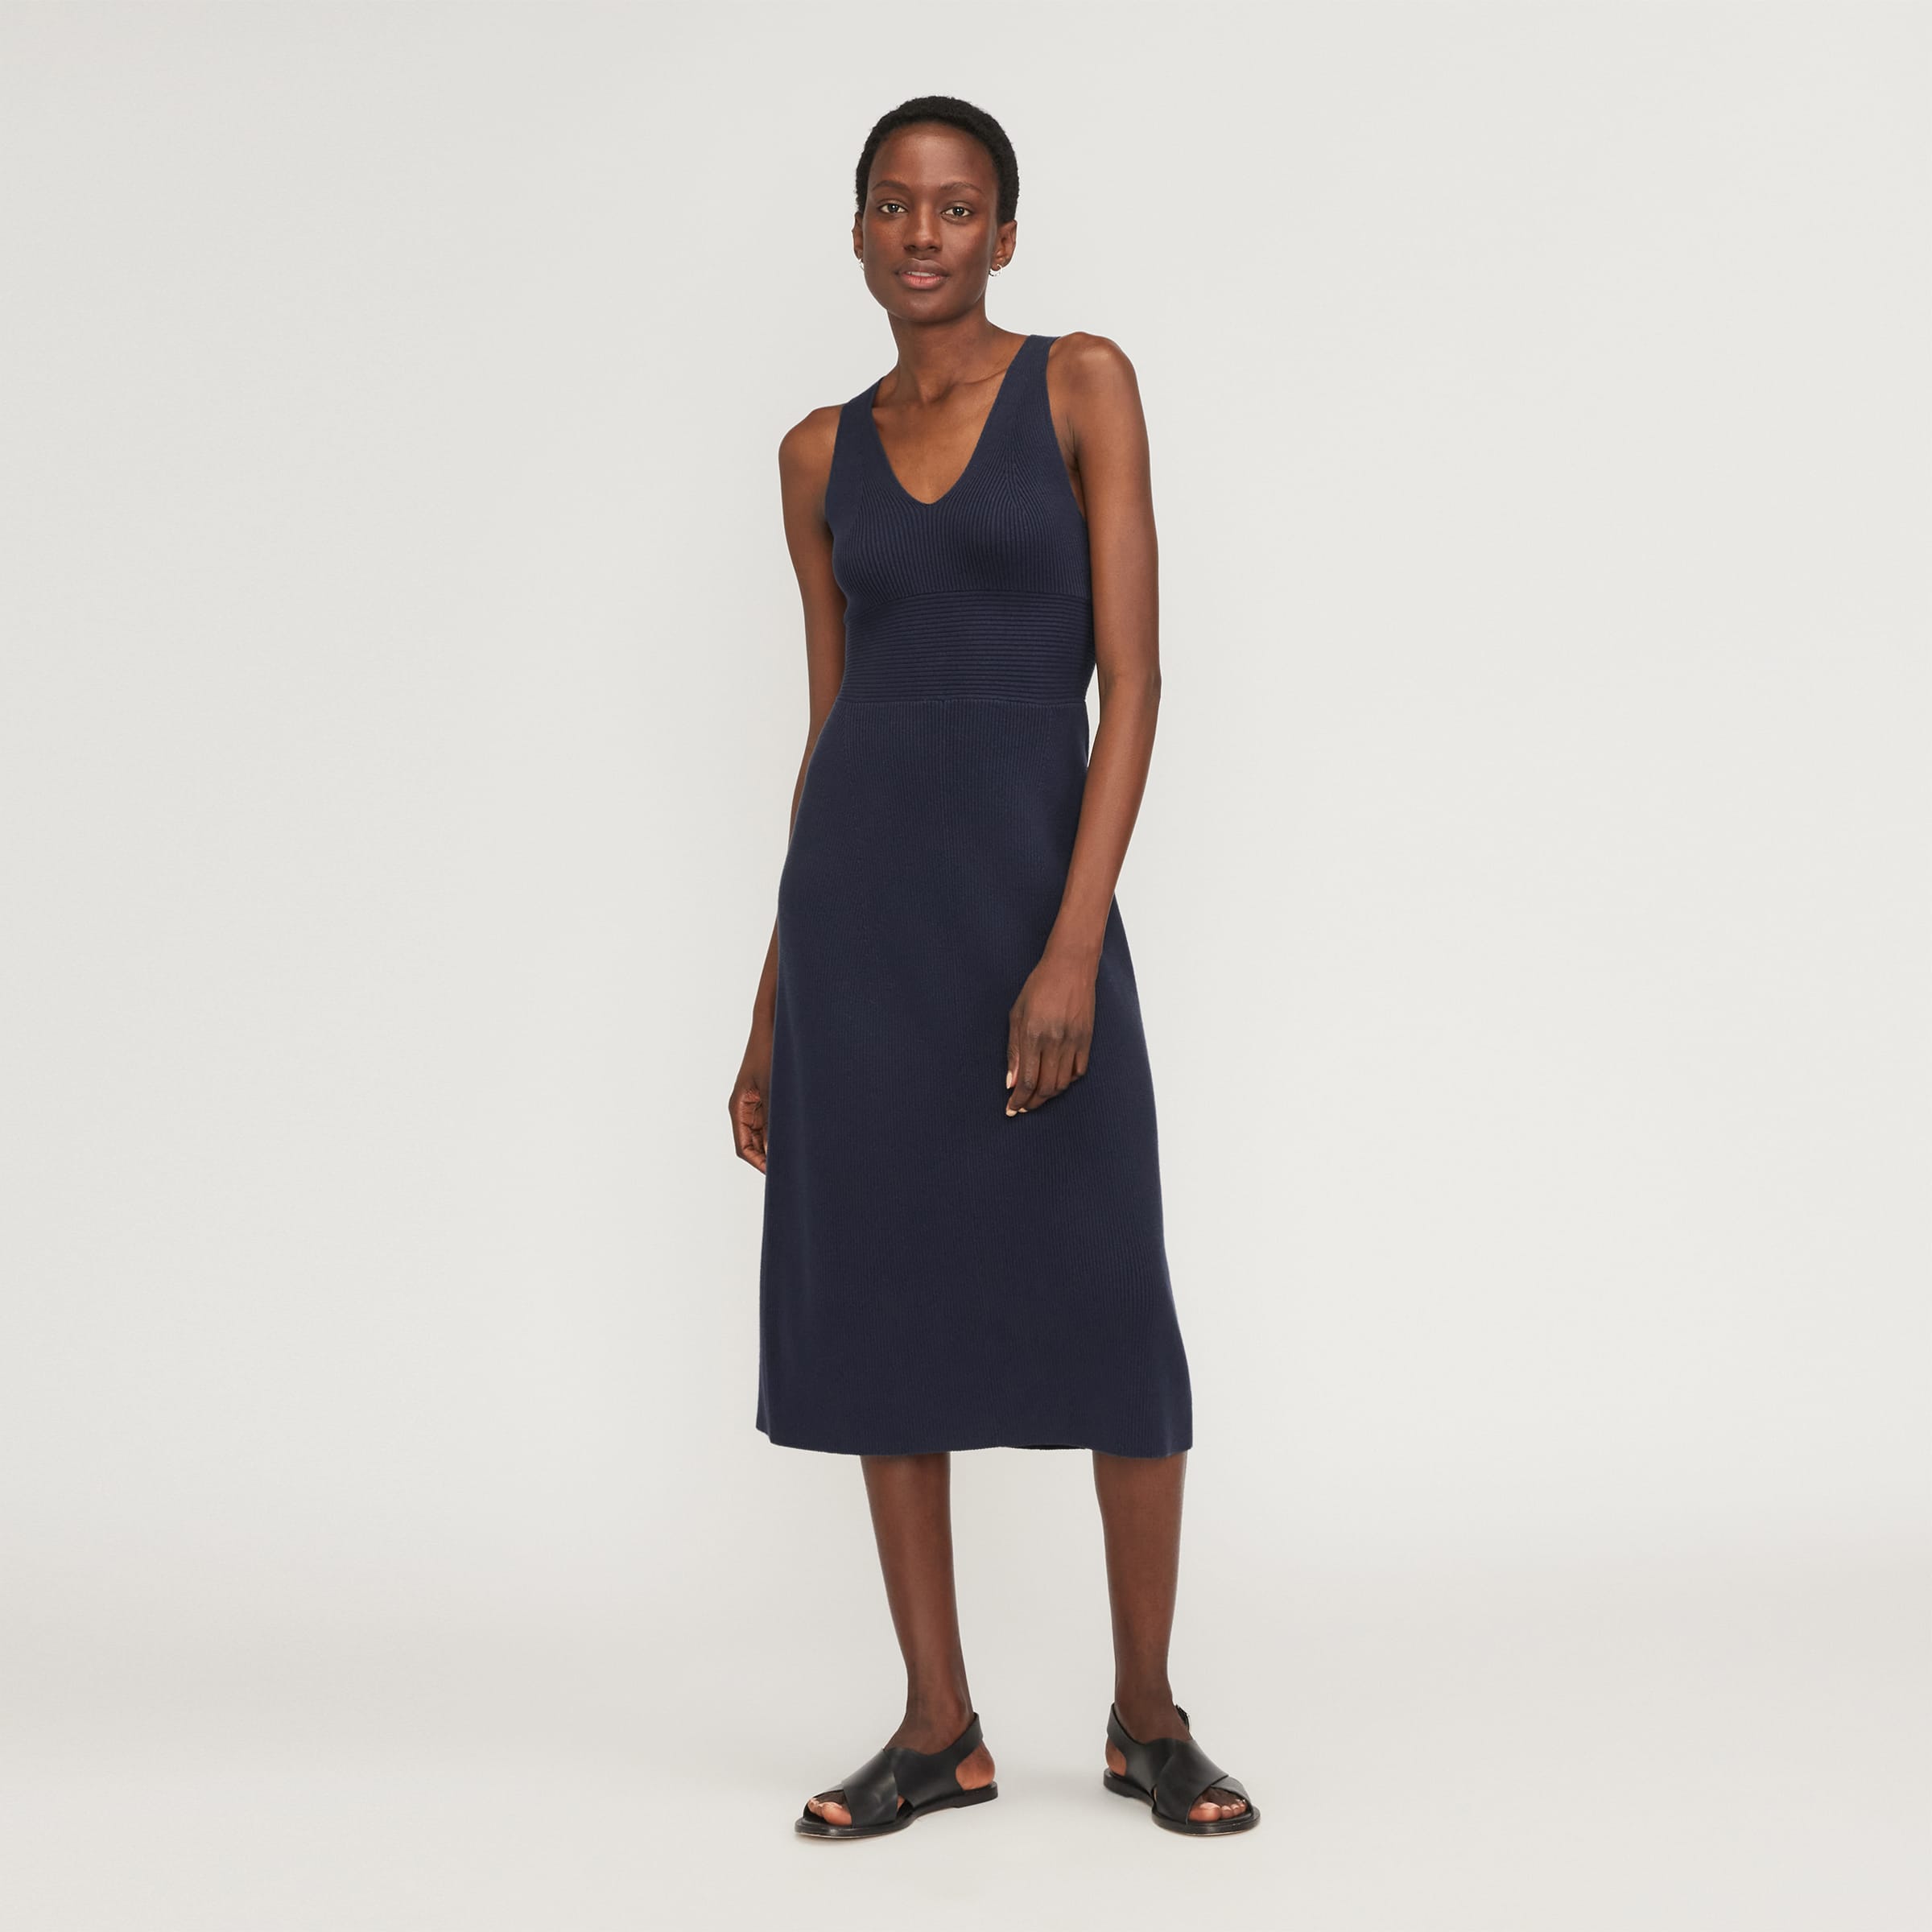 Everlane NWT The Ribbed Tank Dress in Beech Size L - $60 New With Tags -  From Desert